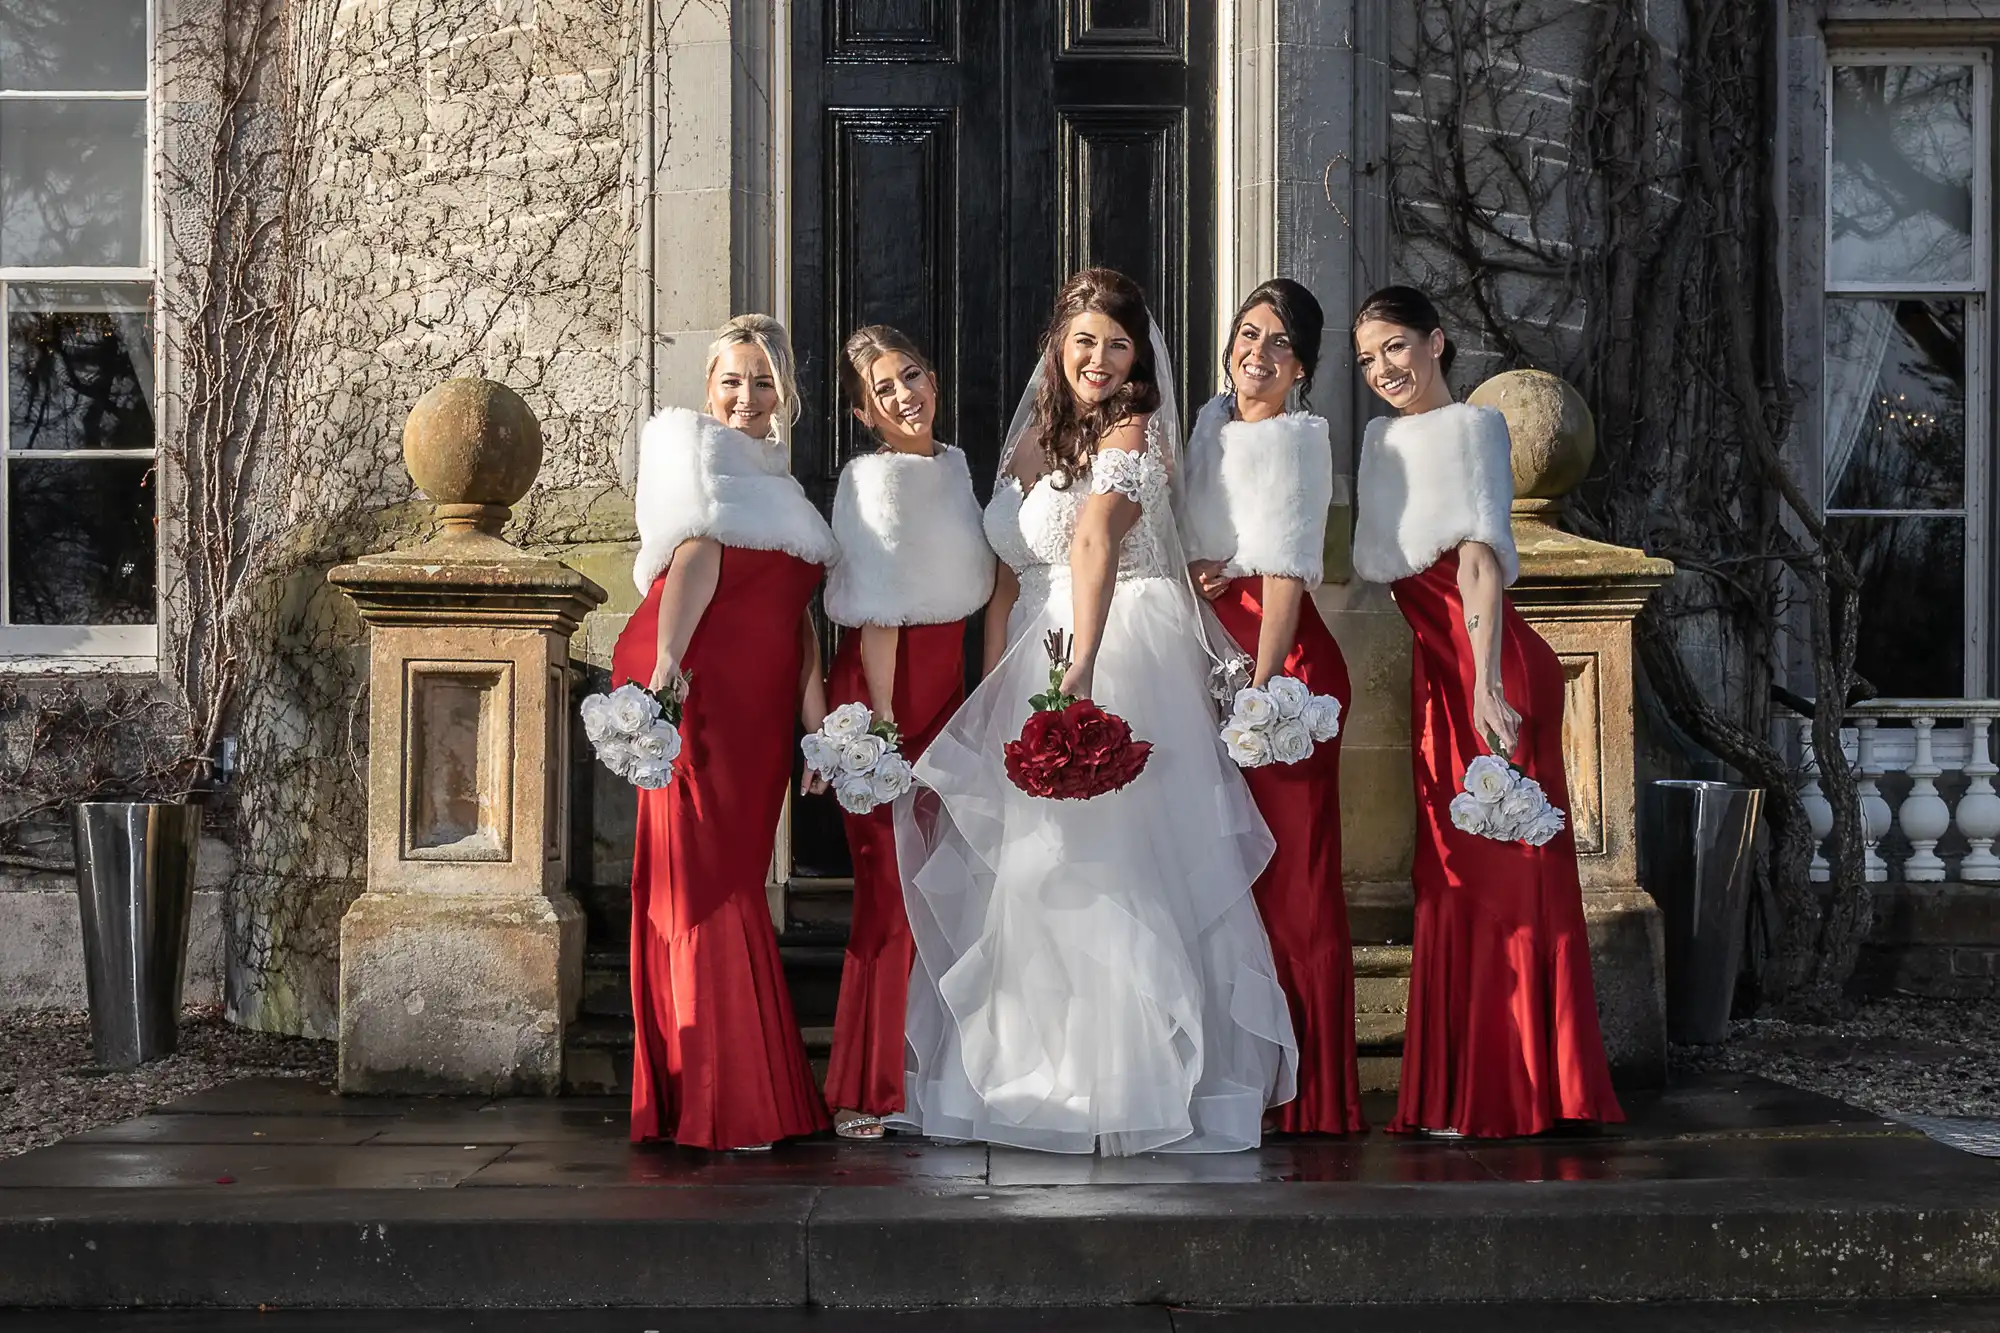 A bride in a white gown and floral bouquet stands with four bridesmaids in red dresses and white fur stoles, posing together outdoors in front of a large door.